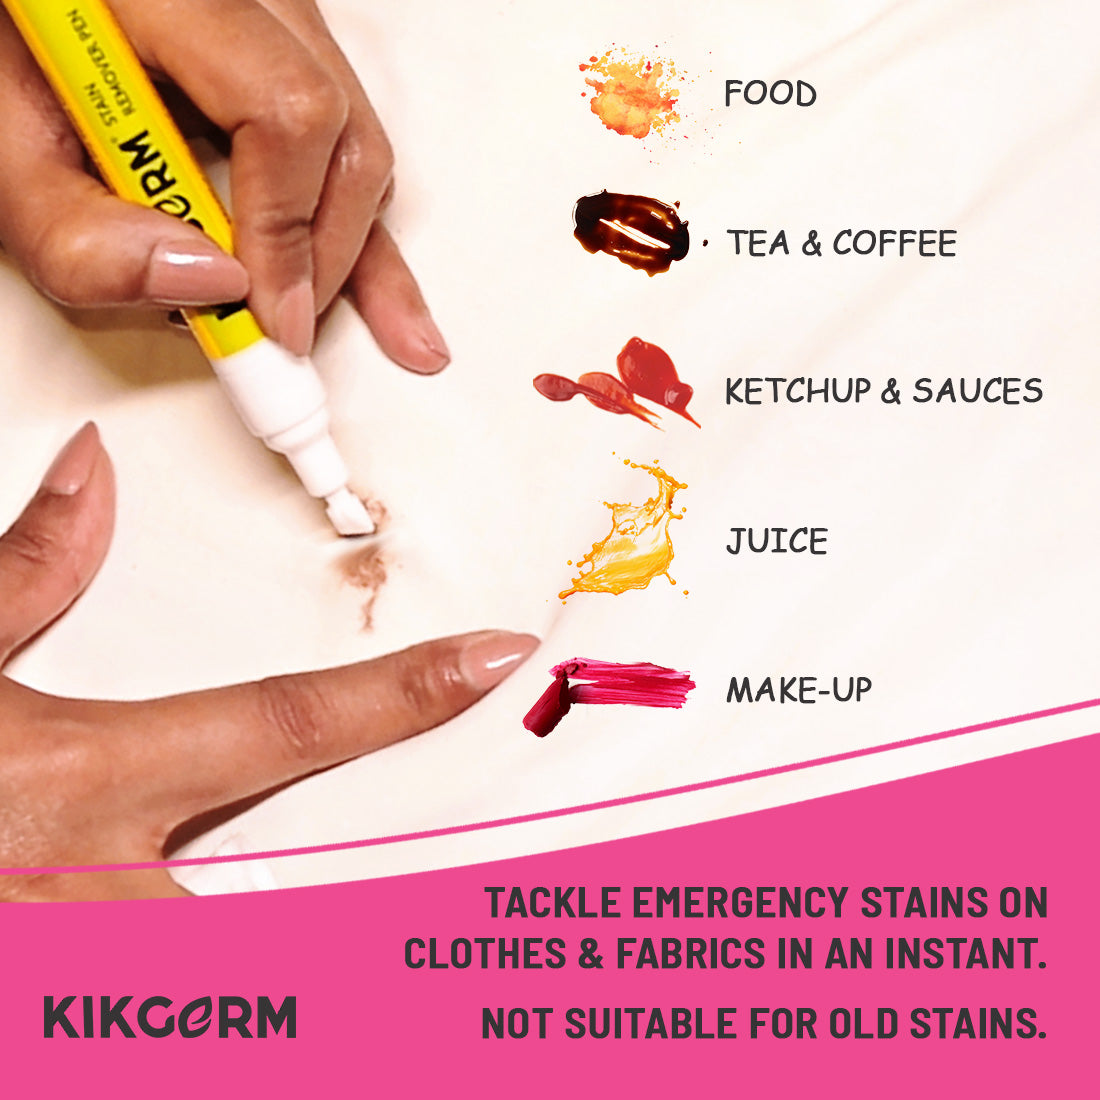 Stain Remover Pen | Pink | all pens are same except outer packaging colour